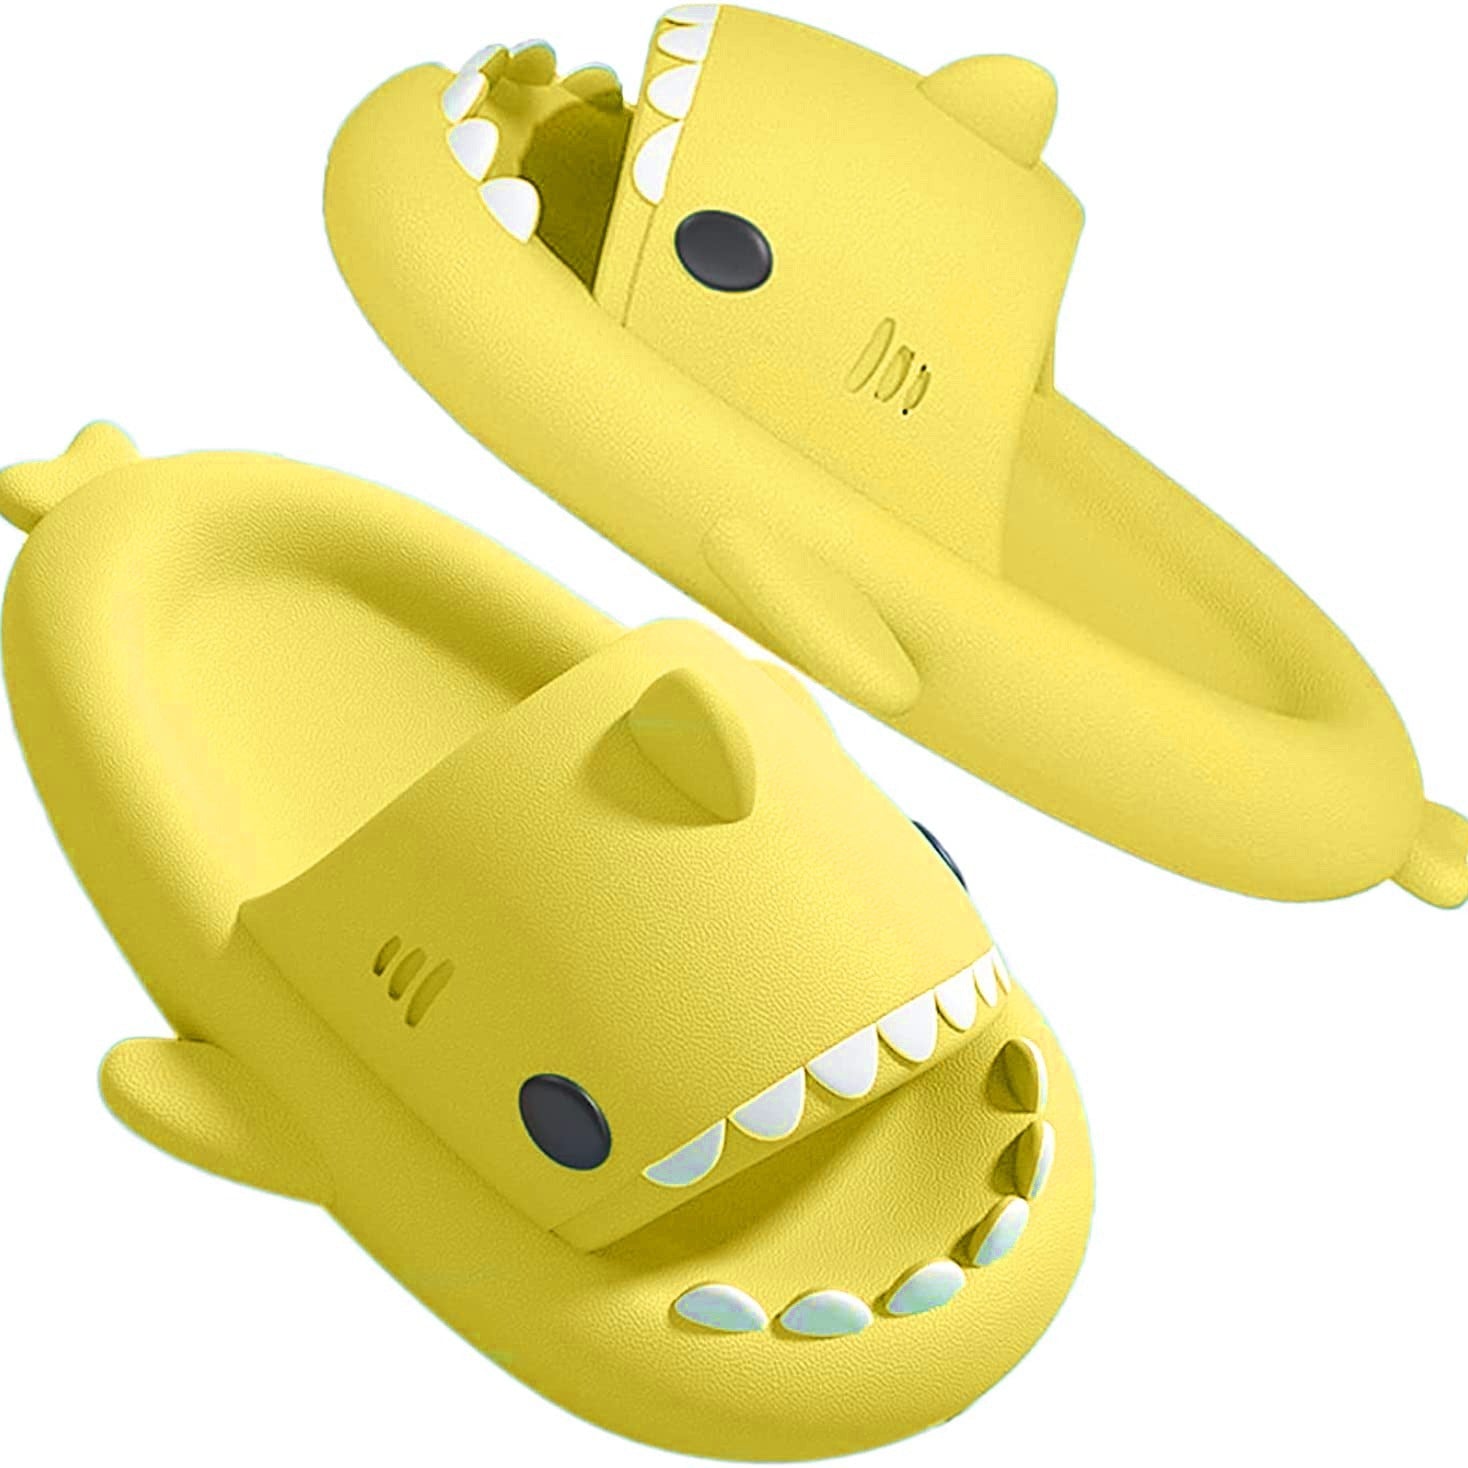 「binfenxie」Luxuriously Soft Shark Slippers - Perfect for Summer Poolside Lounging!